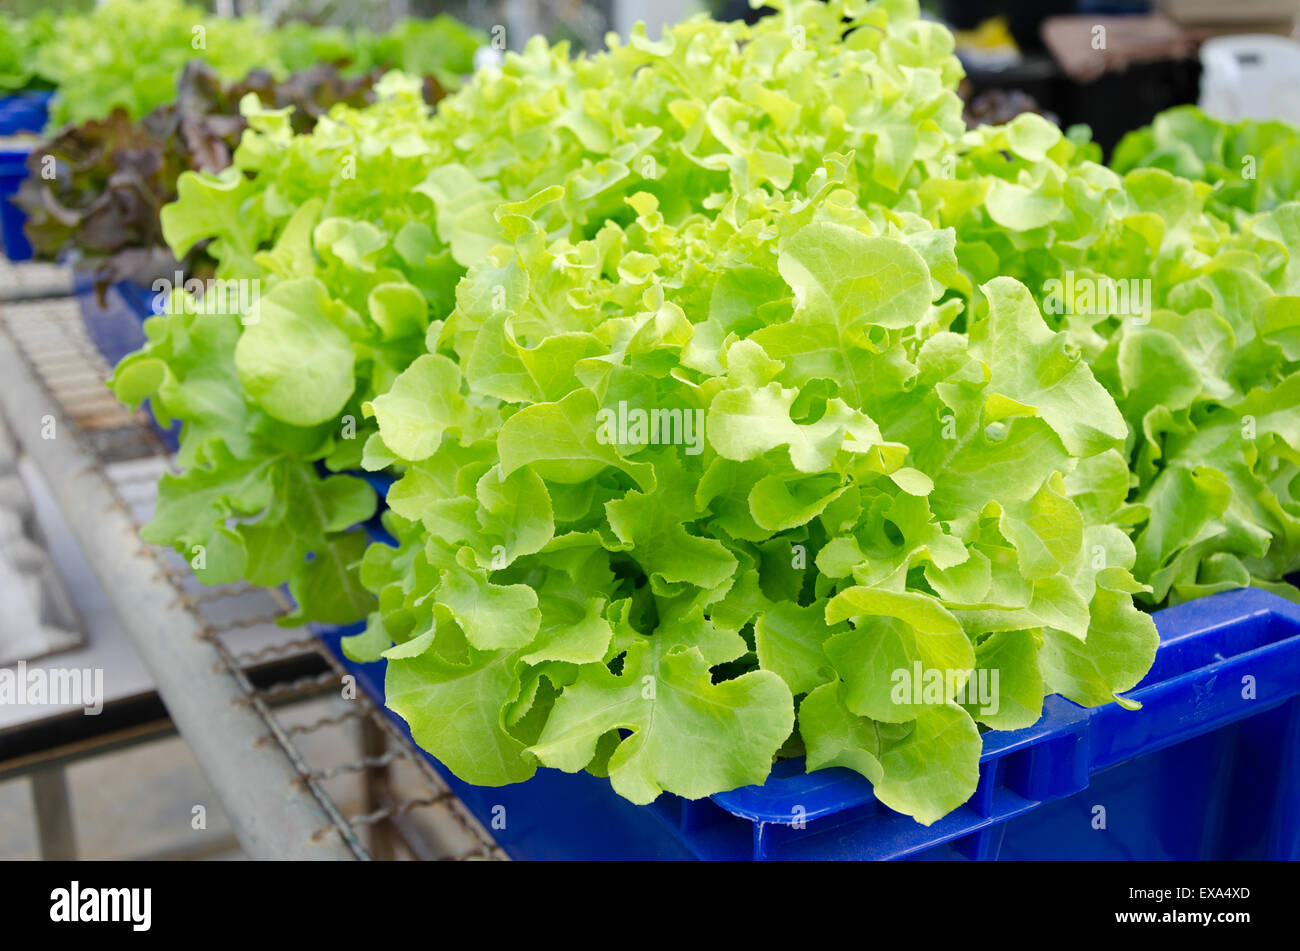 HYDROPONIC vegetables grown in blue plastic containers. Stock Photo